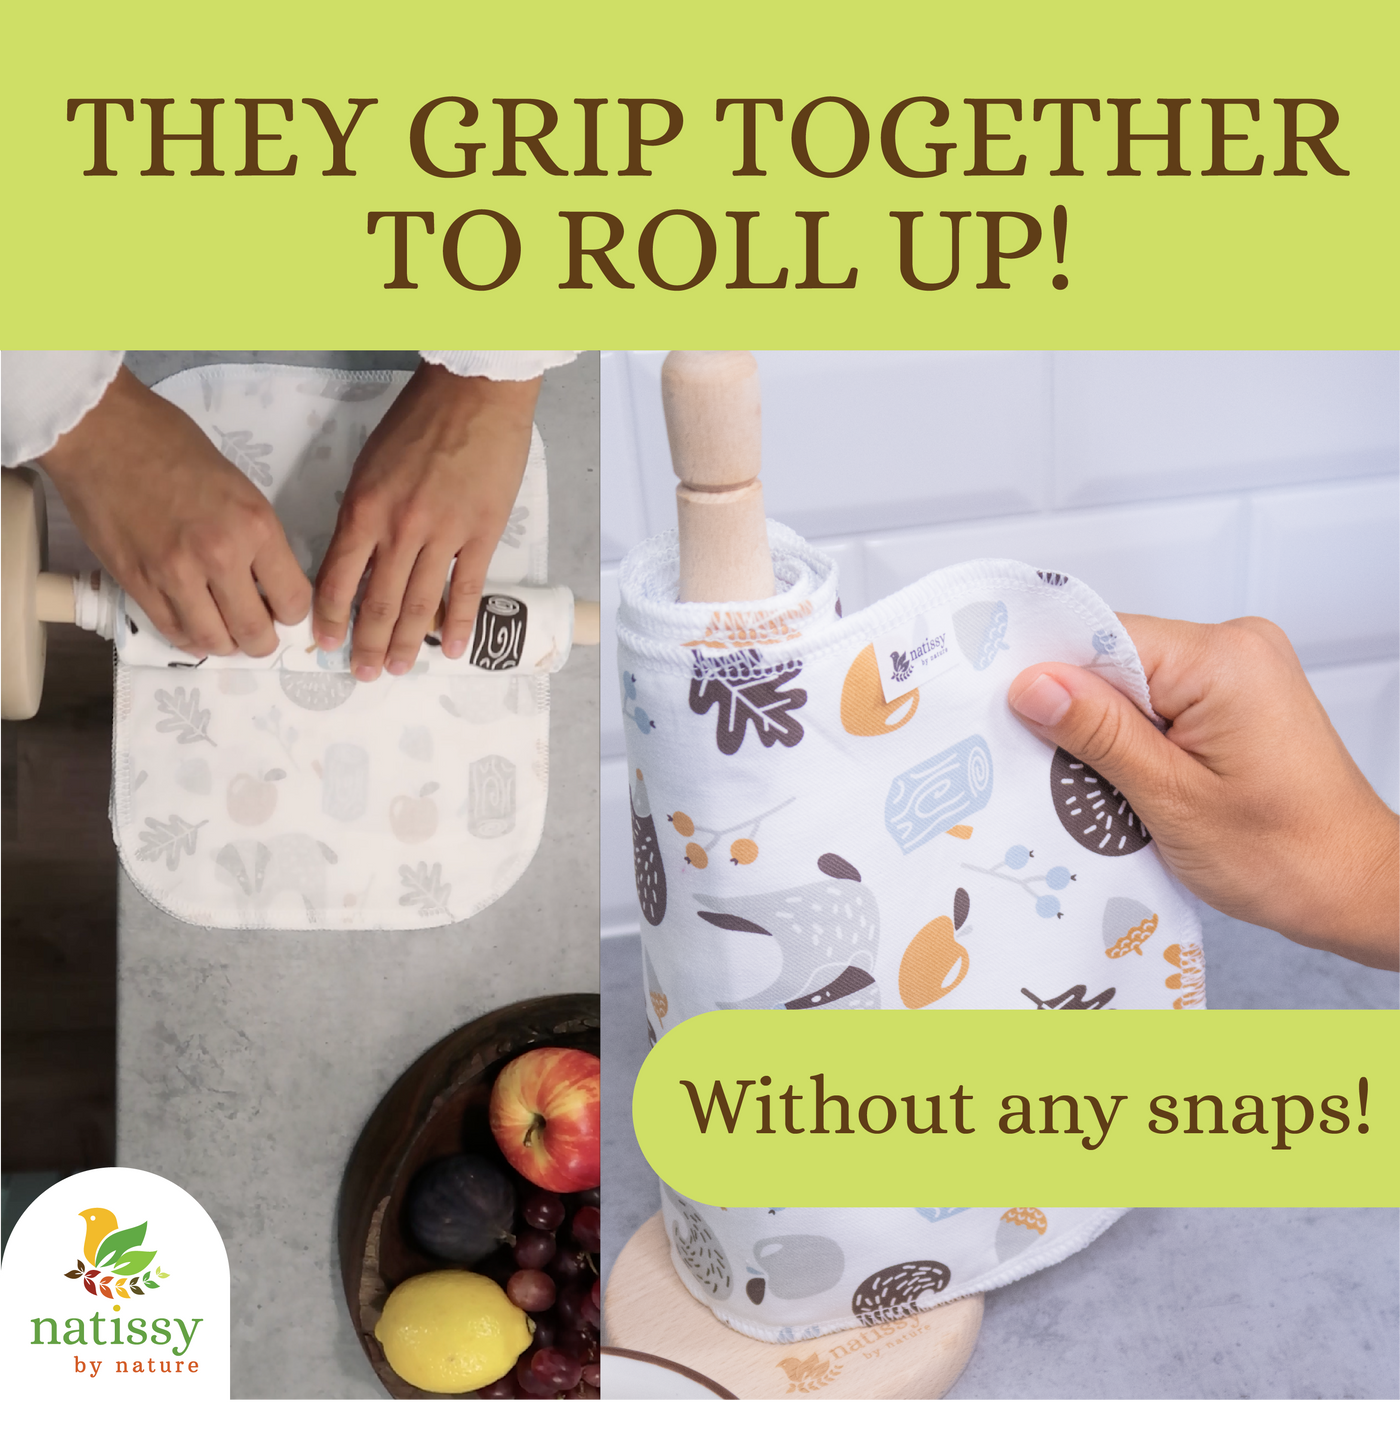 Reusable Unpaper Kitchen Towels, Roll of 10 Washable Bamboo Cloth Wipes MADE IN EU, Eco-Friendly Paper Towel Cleaning Alternative; Ultra Absorbent, Super Strong, Tear-Resistant & Multipurpose Paperless Replacement